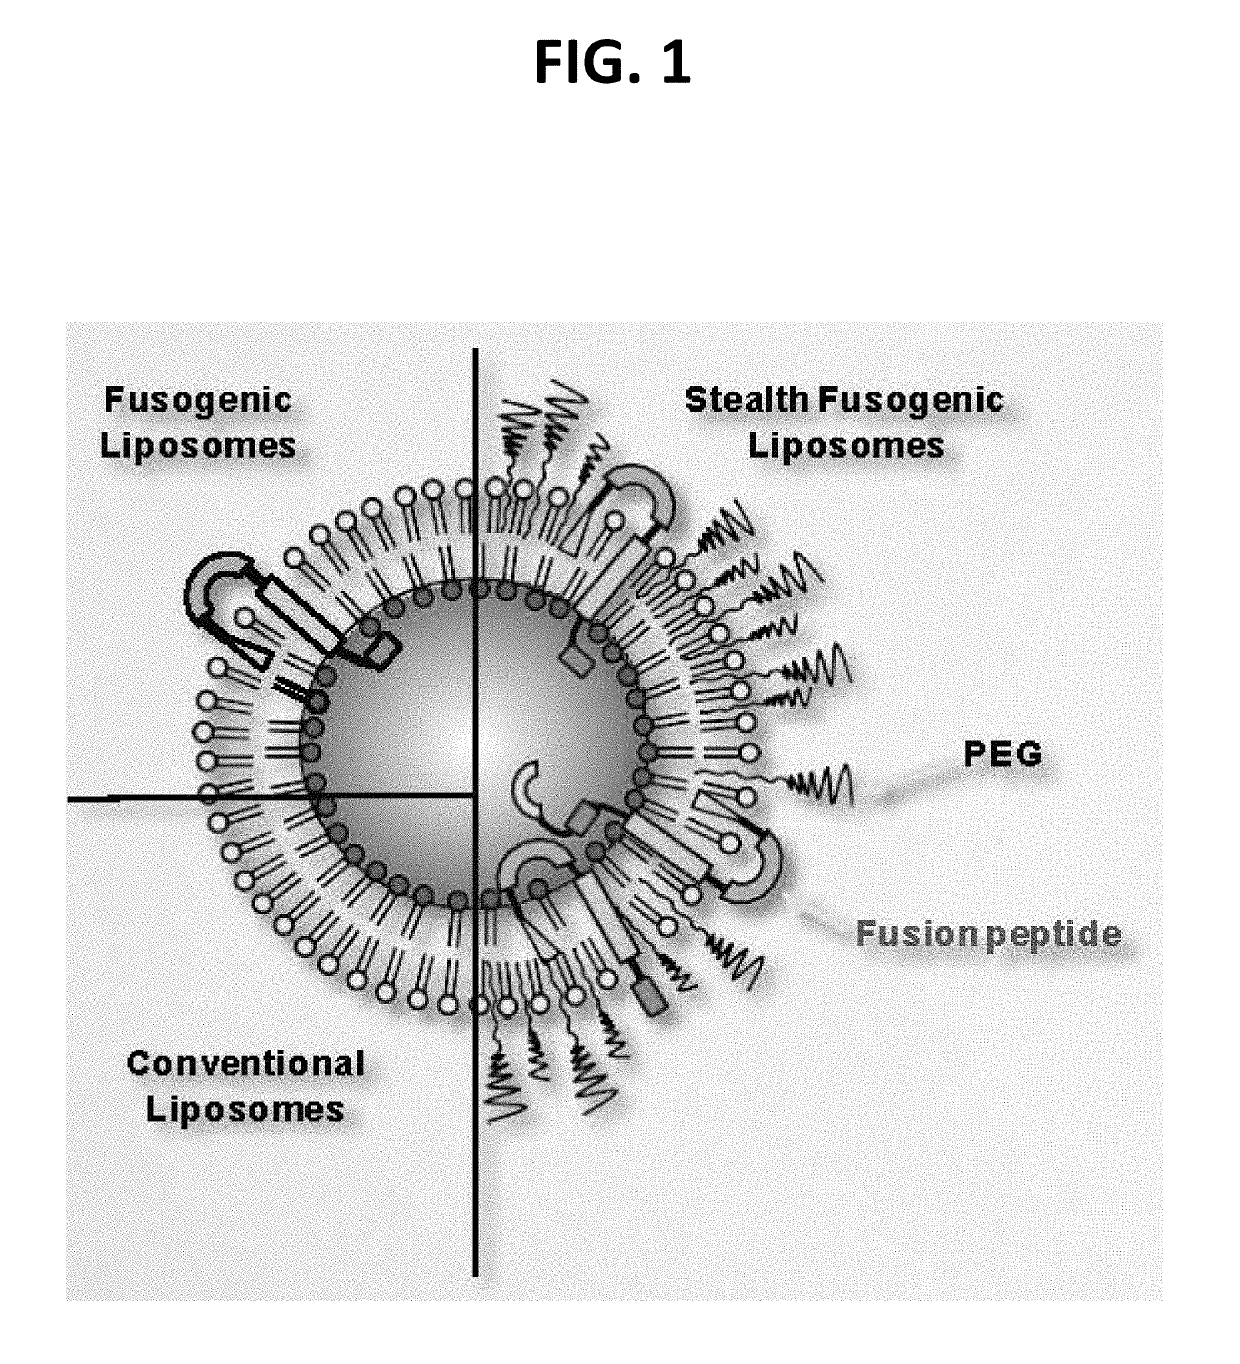 Fusogenic lipid nanoparticles and methods for the manufacture and use thereof for the target cell-specific production of a therapeutic protein and for the treatment of a disease, condition, or disorder associated with a target cell